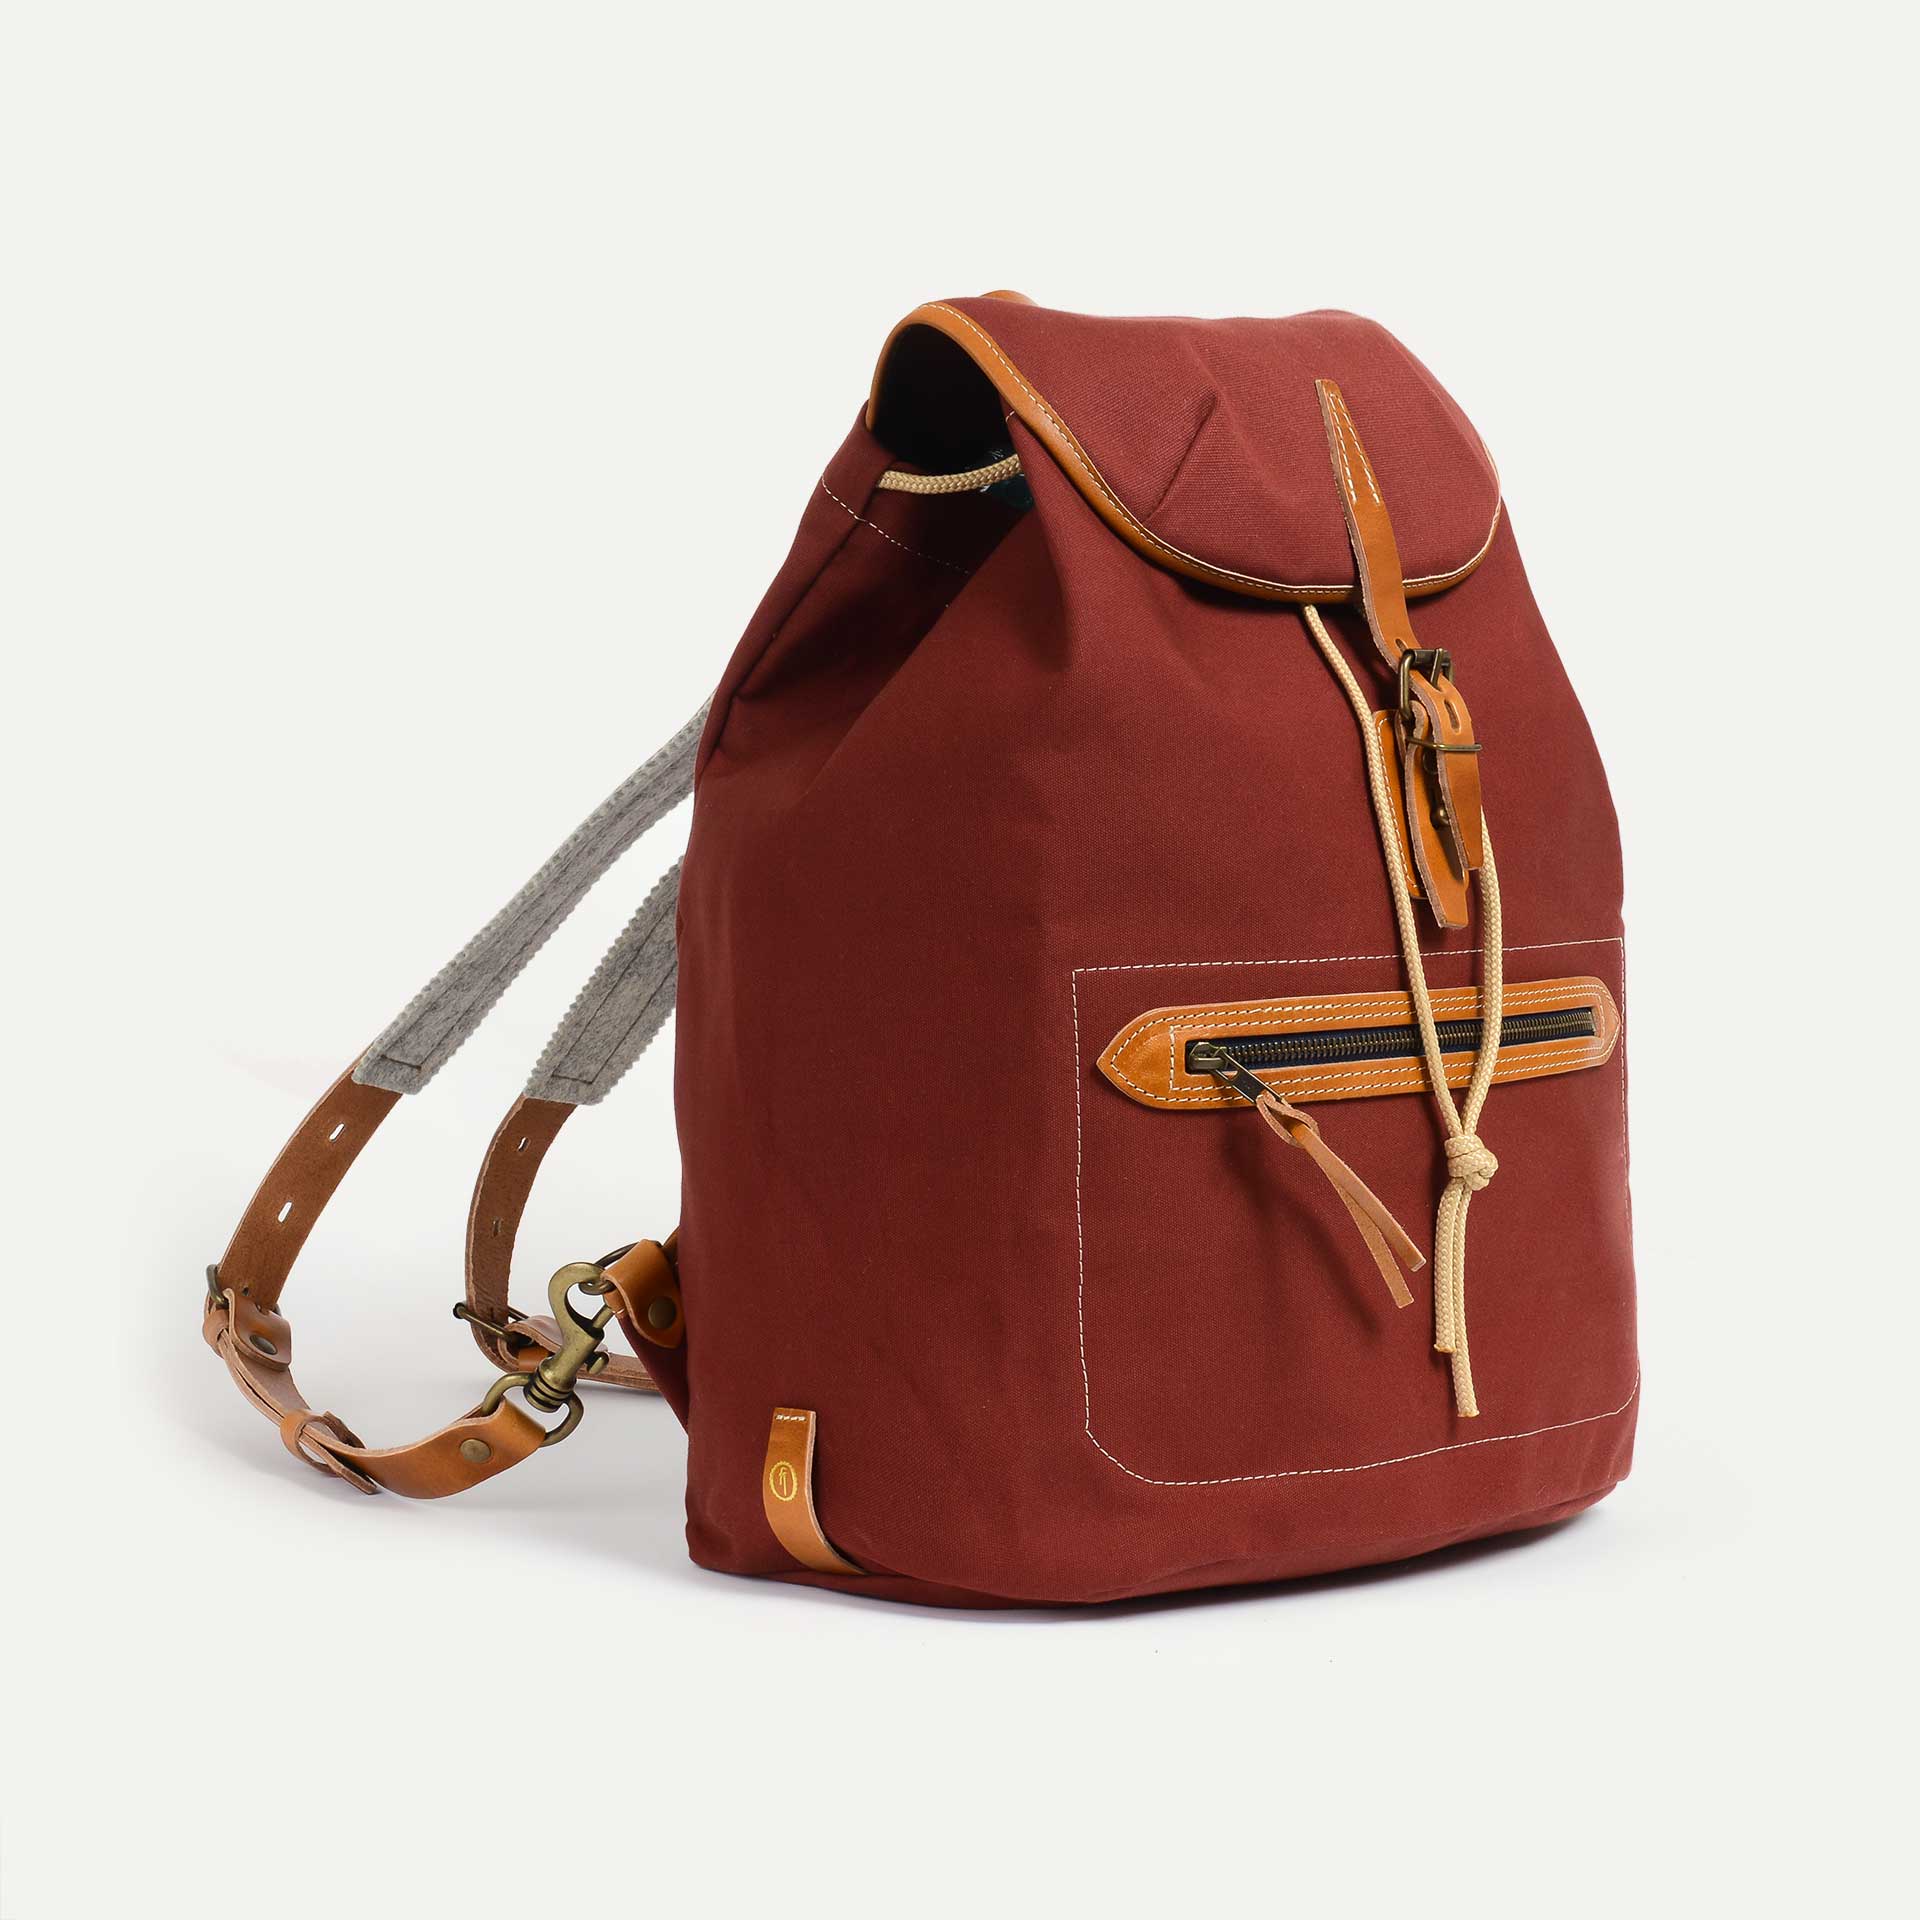 Camp canvas backpack